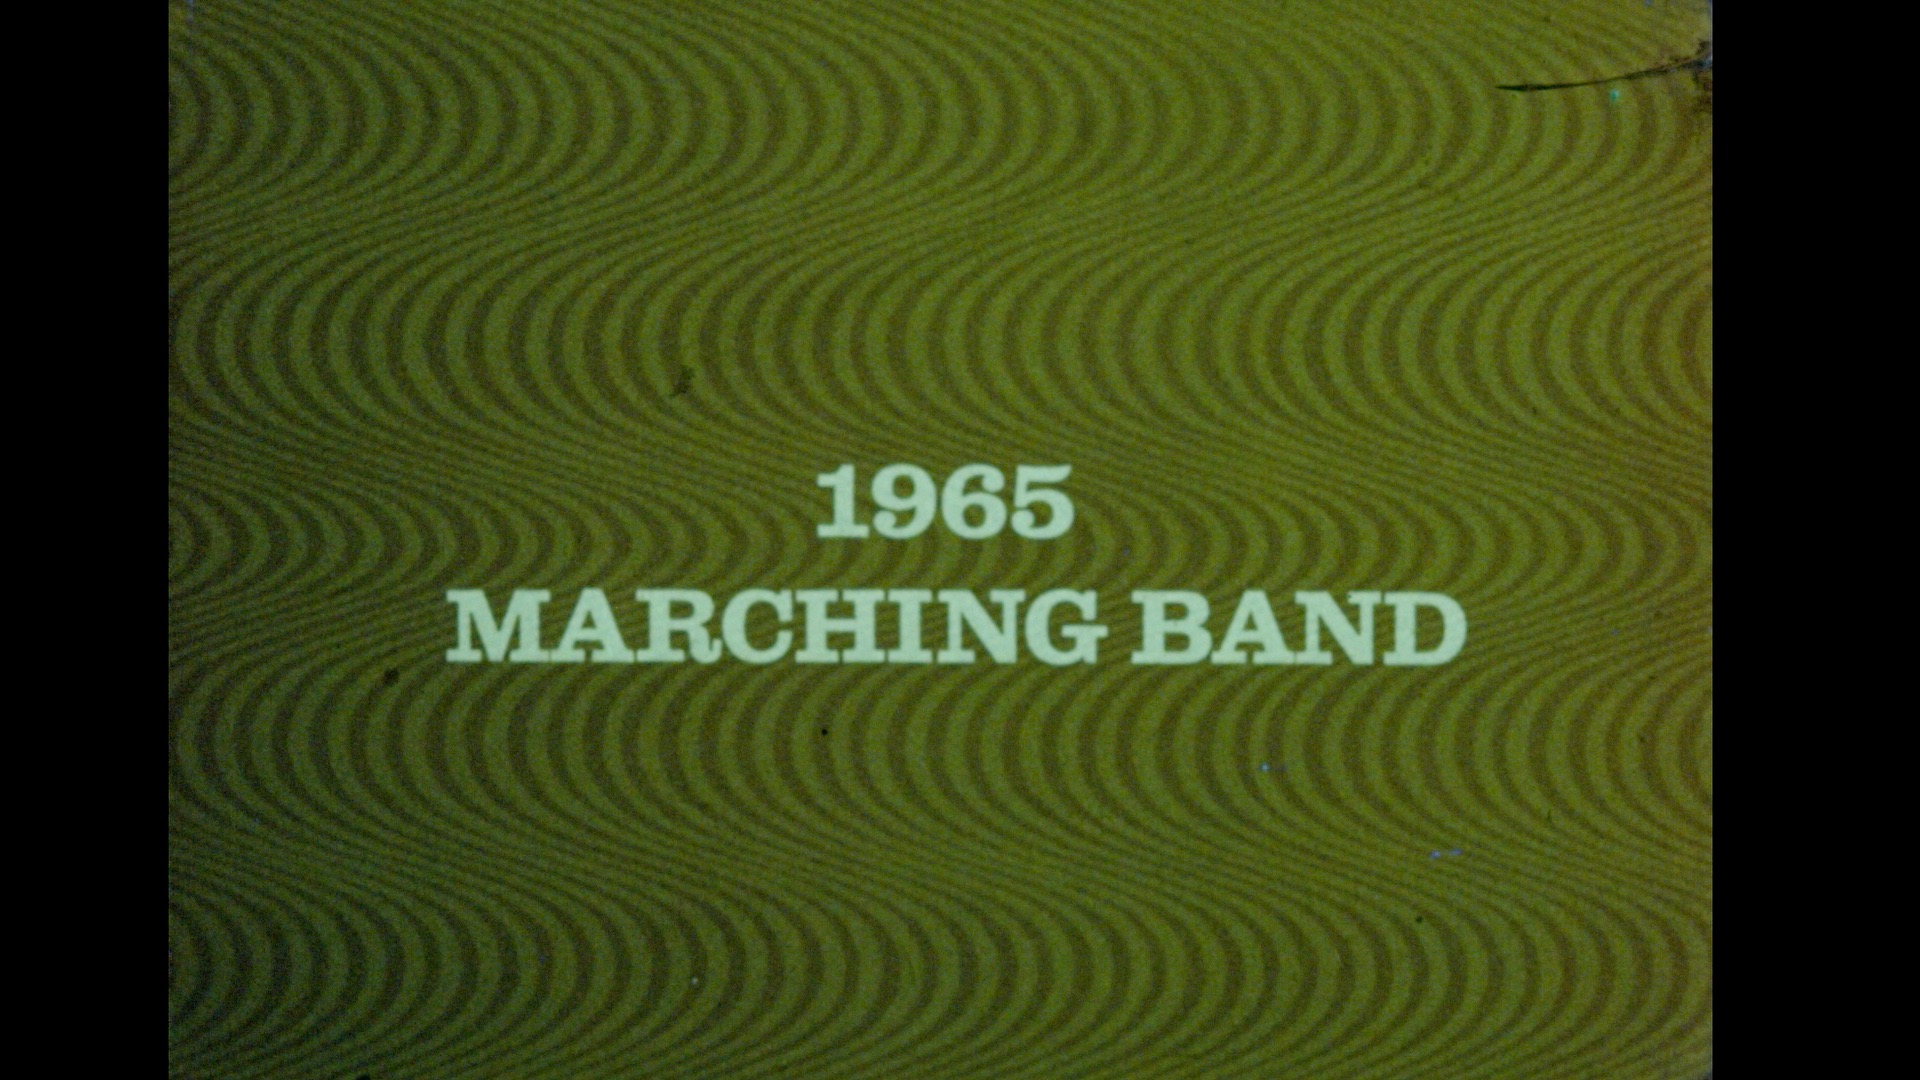 MSU Marching Band (Silent), 1965